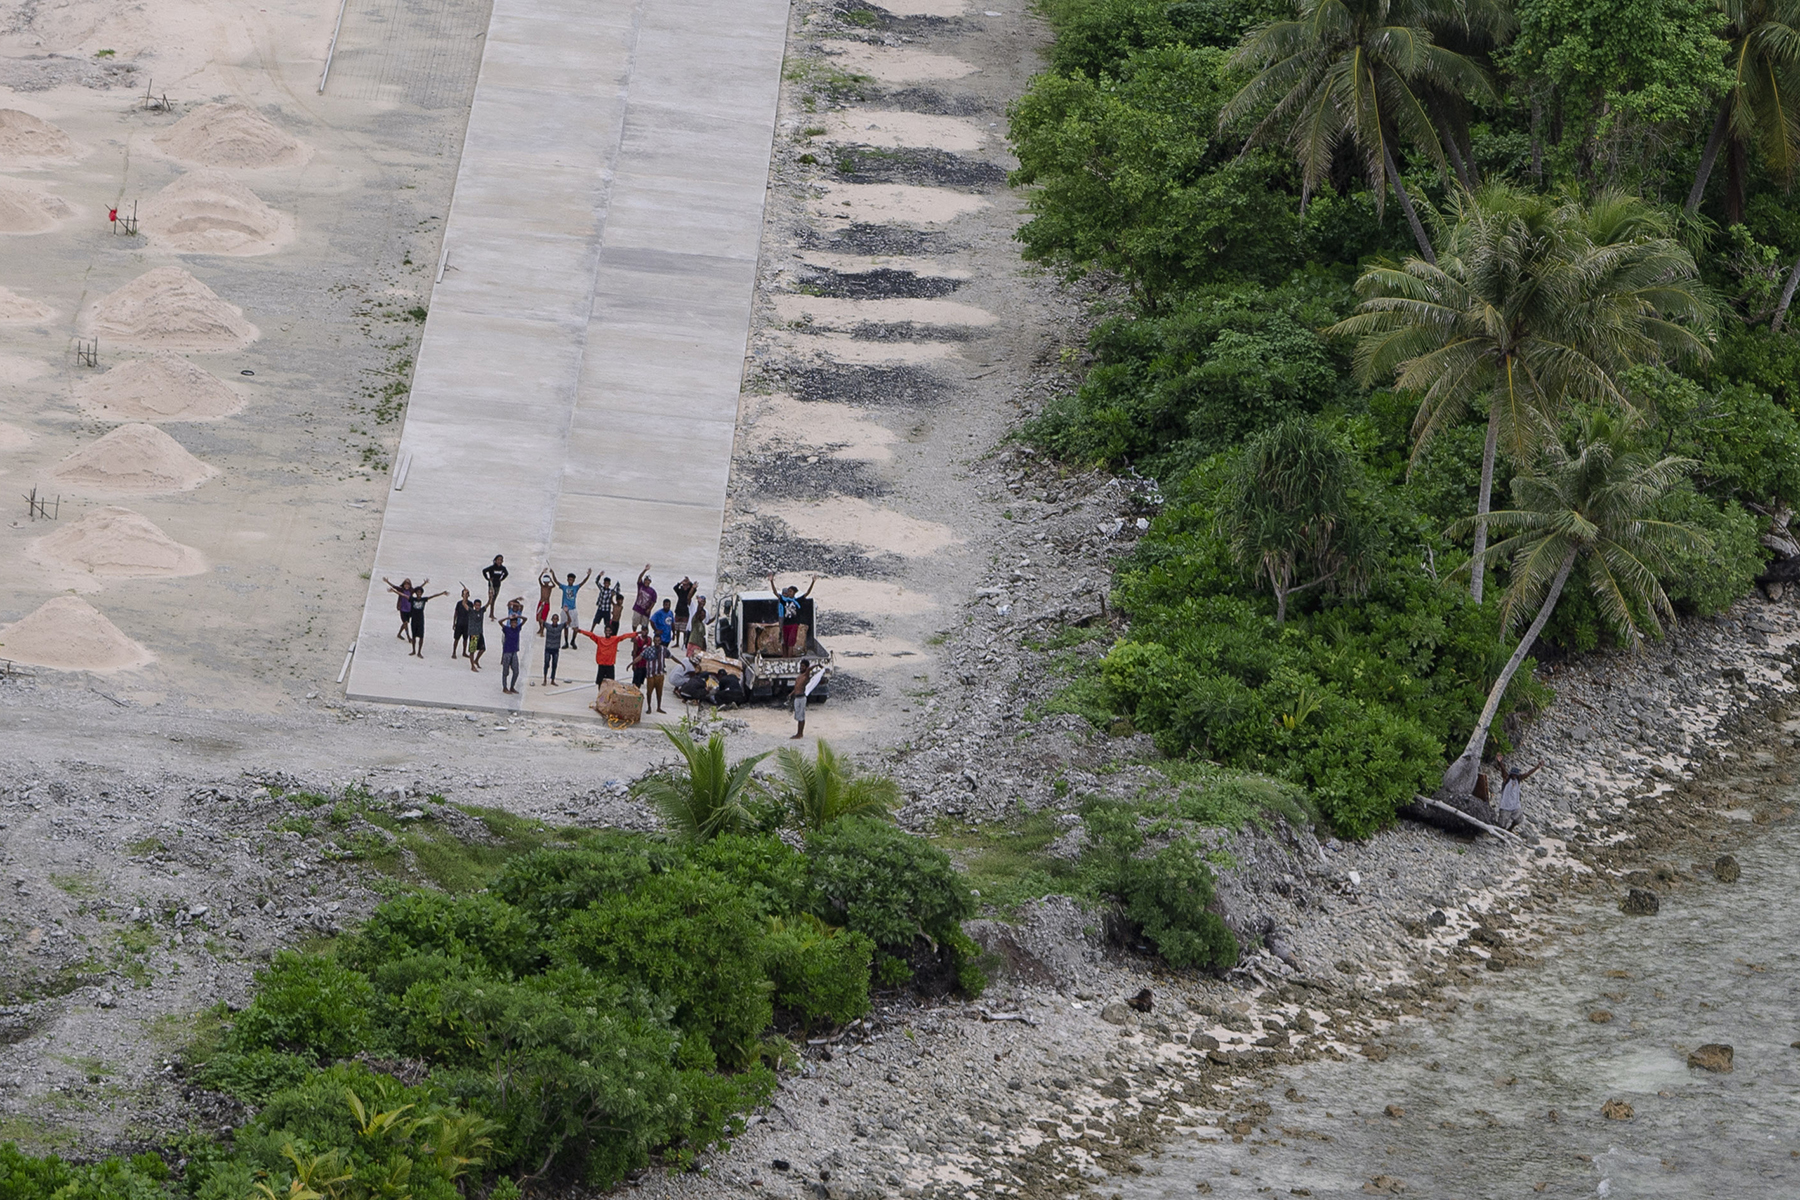 About 20 people, shown from above, stand and wave at the end of a rough airstrip on an island.